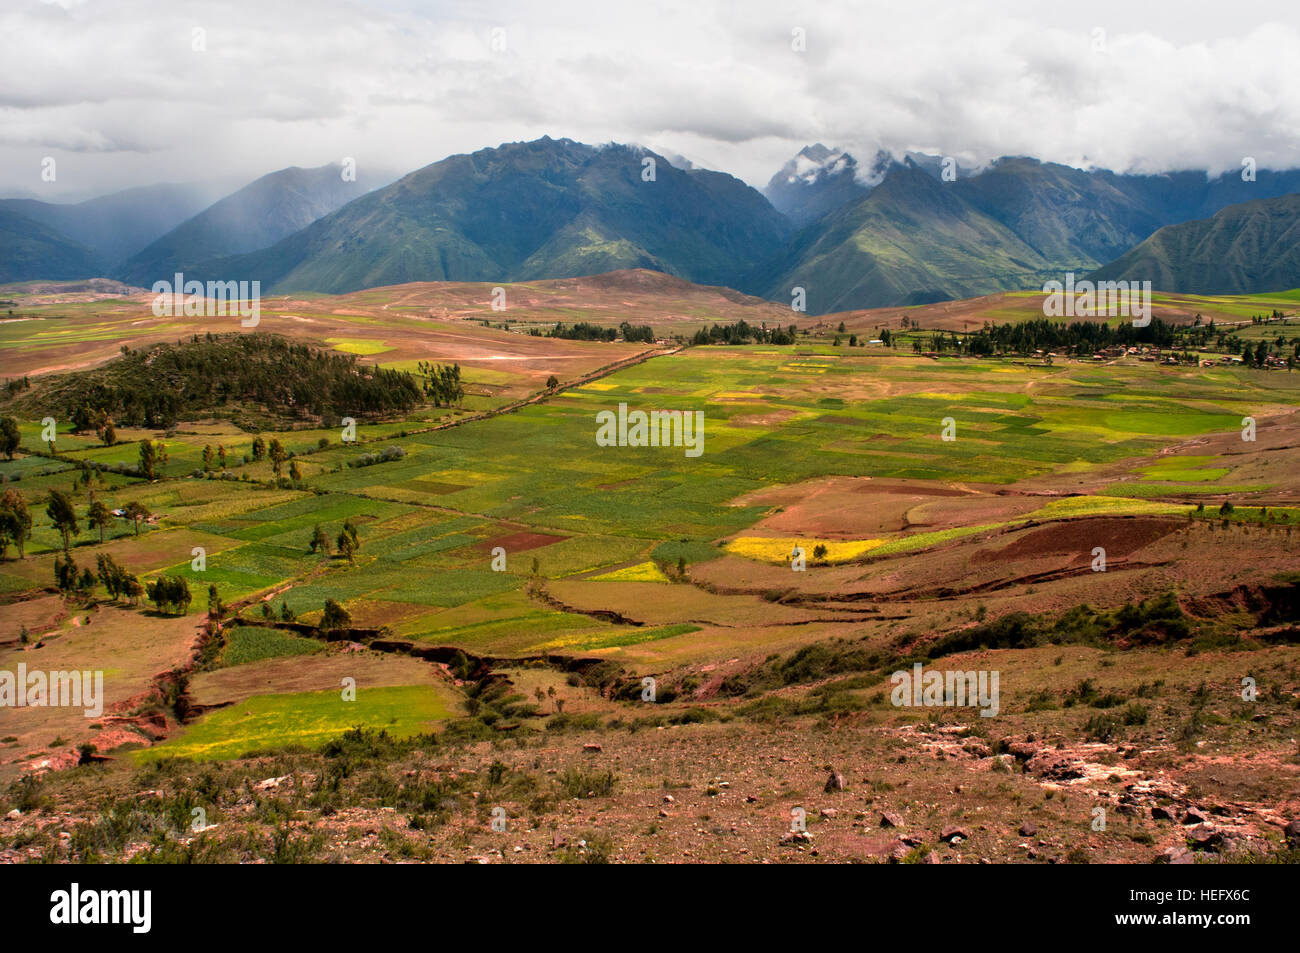 Landscape in the Sacred Valley near Cuzco. The Sacred Valley of the Incas or the Urubamba Valley is a valley in the Andes of Peru, close to the Inca c Stock Photo